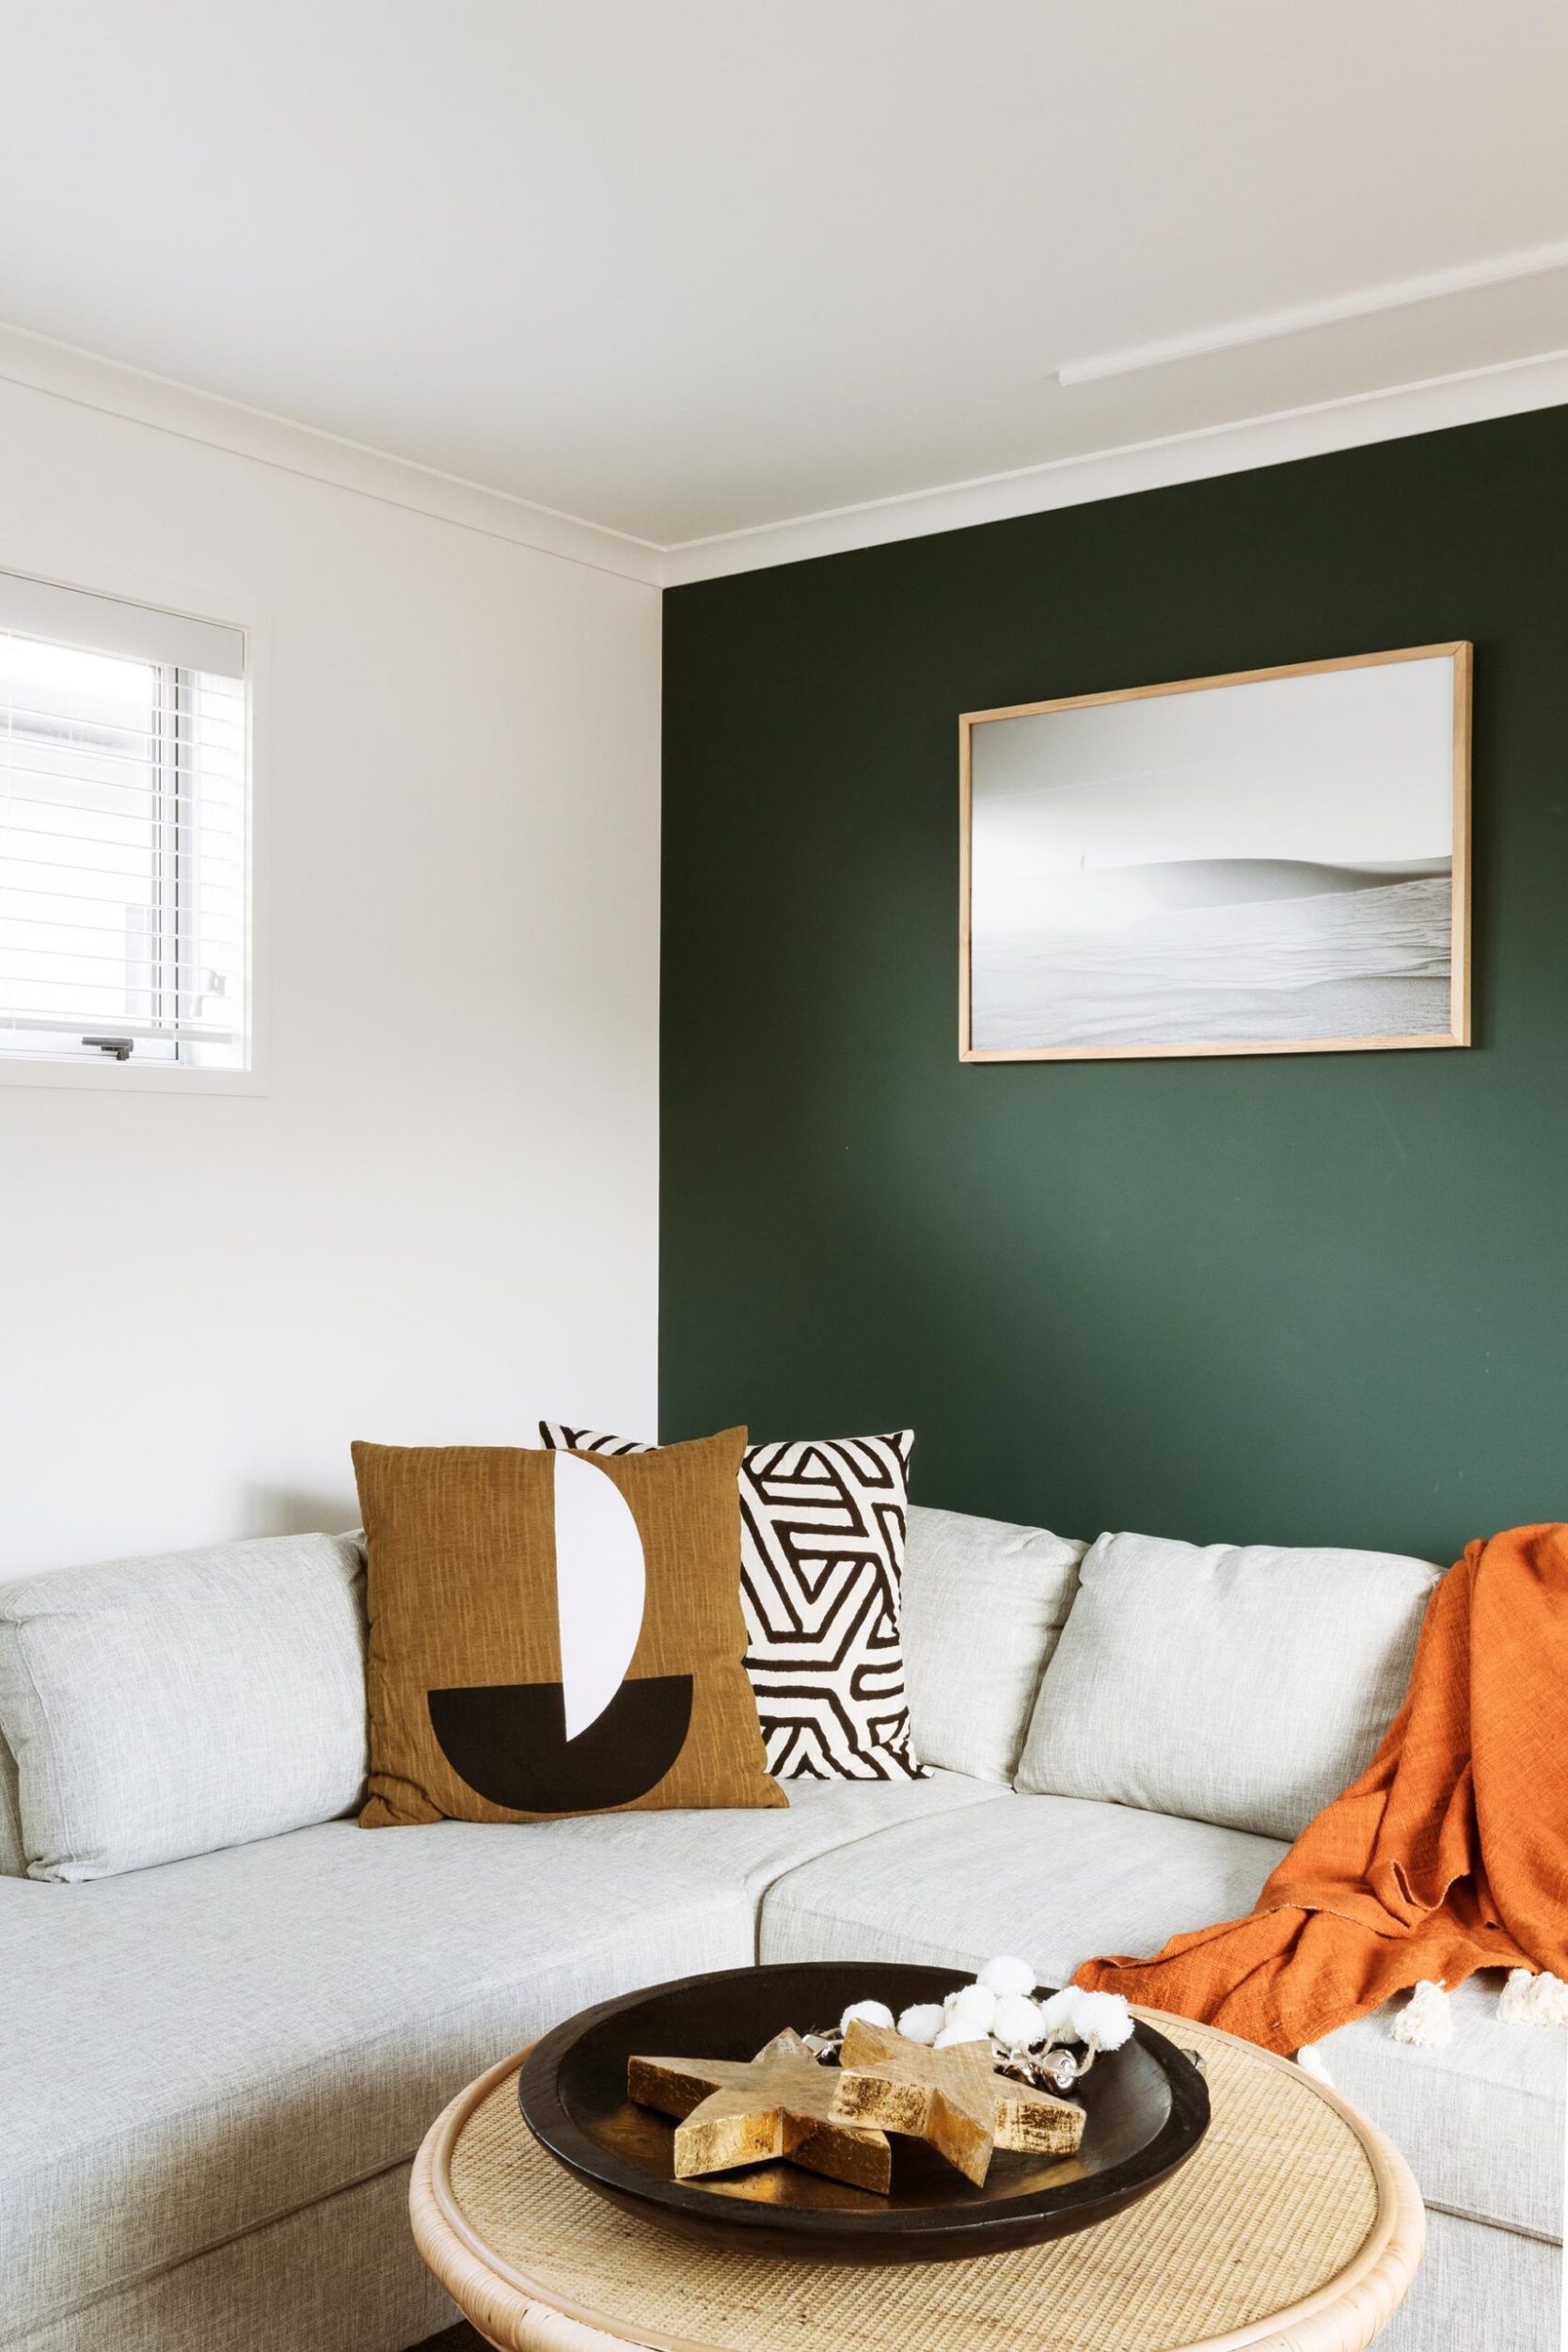 The same deep green is also used in the family room with a lighter beige sofa for cozy vibes